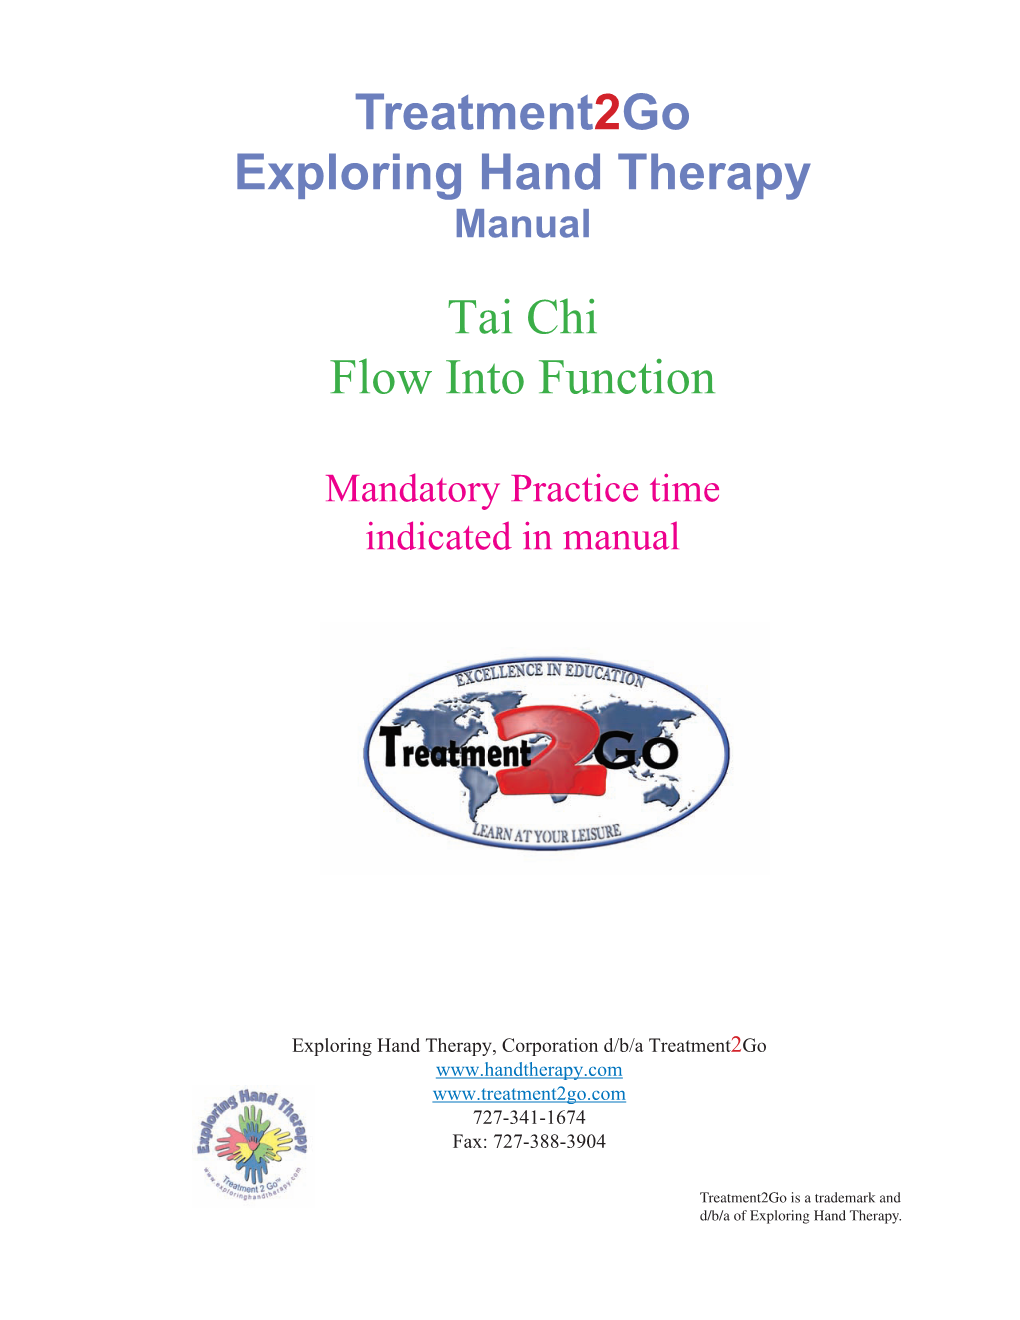 Treatment2go Exploring Hand Therapy Tai Chi Flow Into Function